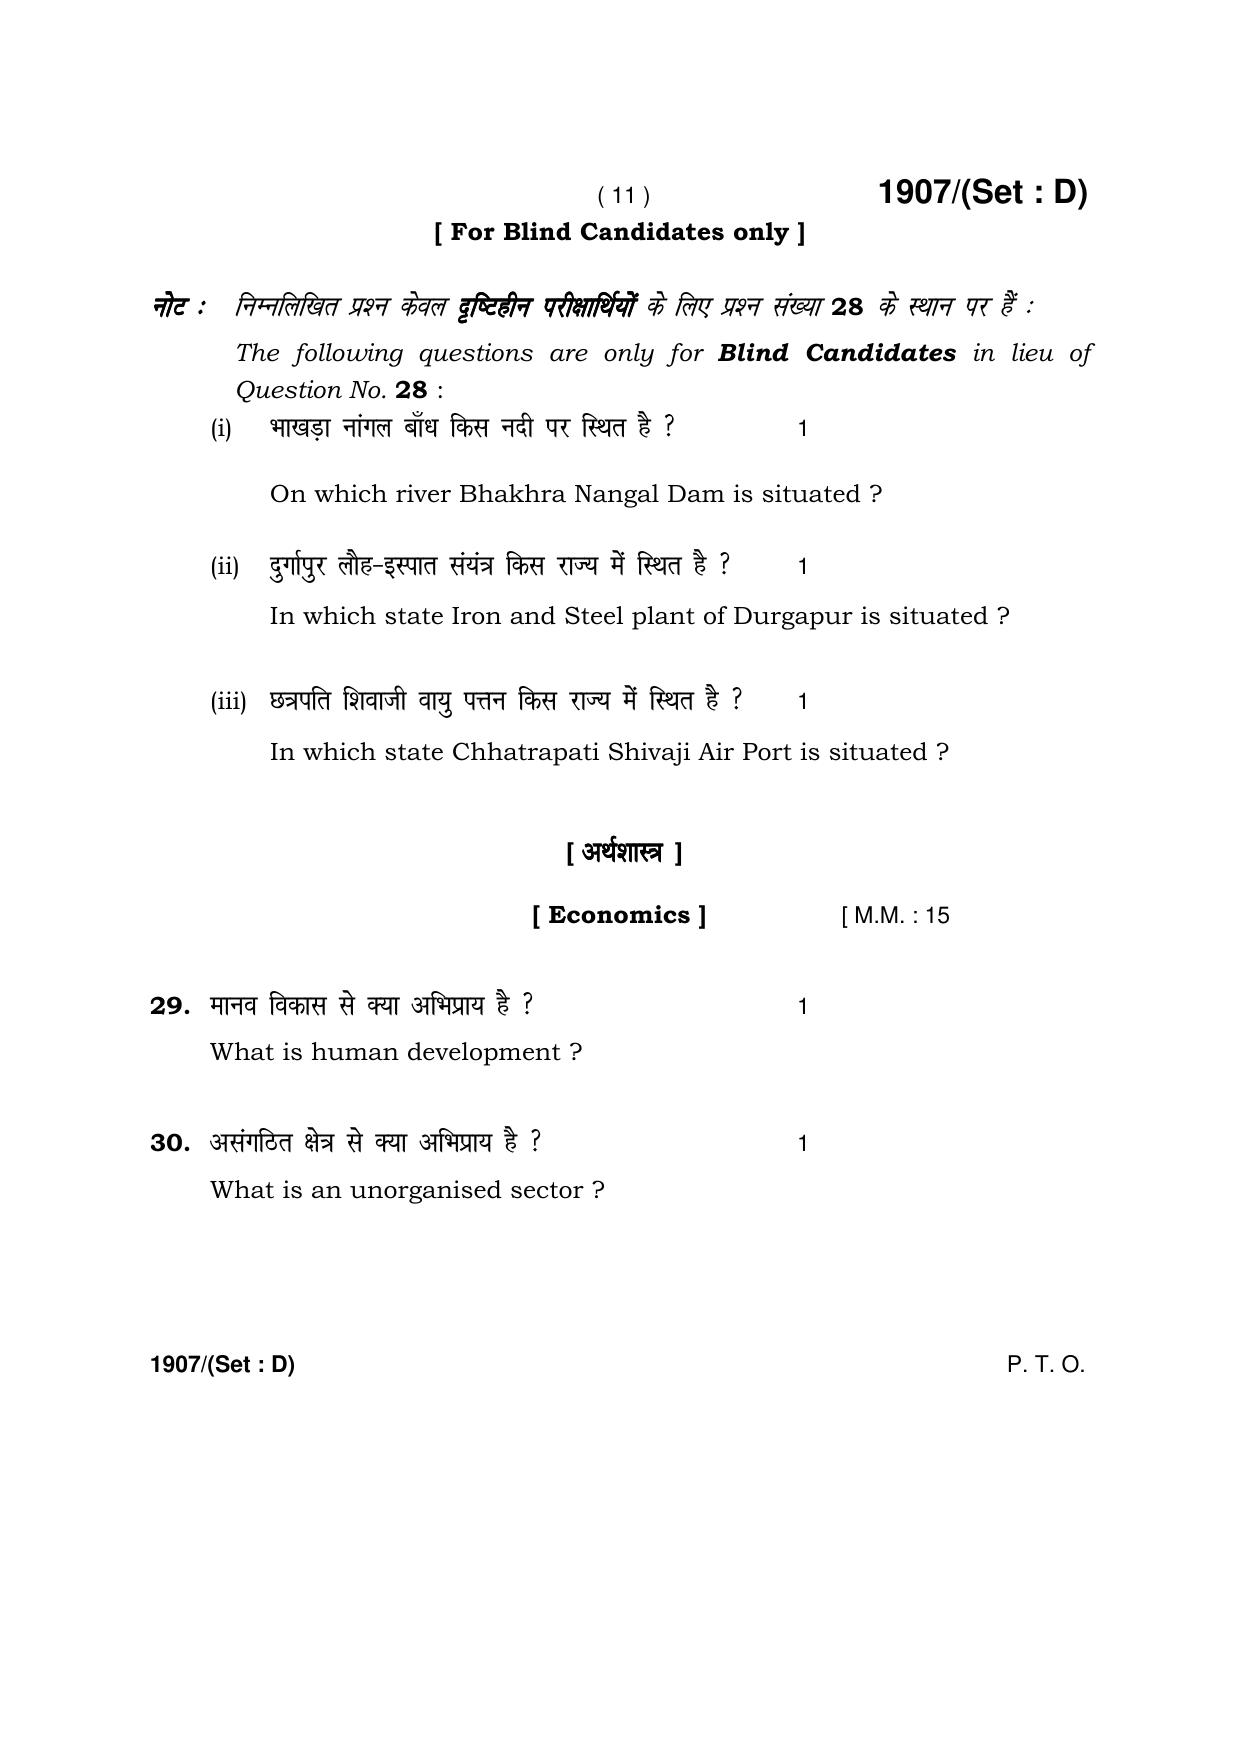 Haryana Board HBSE Class 10 Social Science -D 2017 Question Paper - Page 11